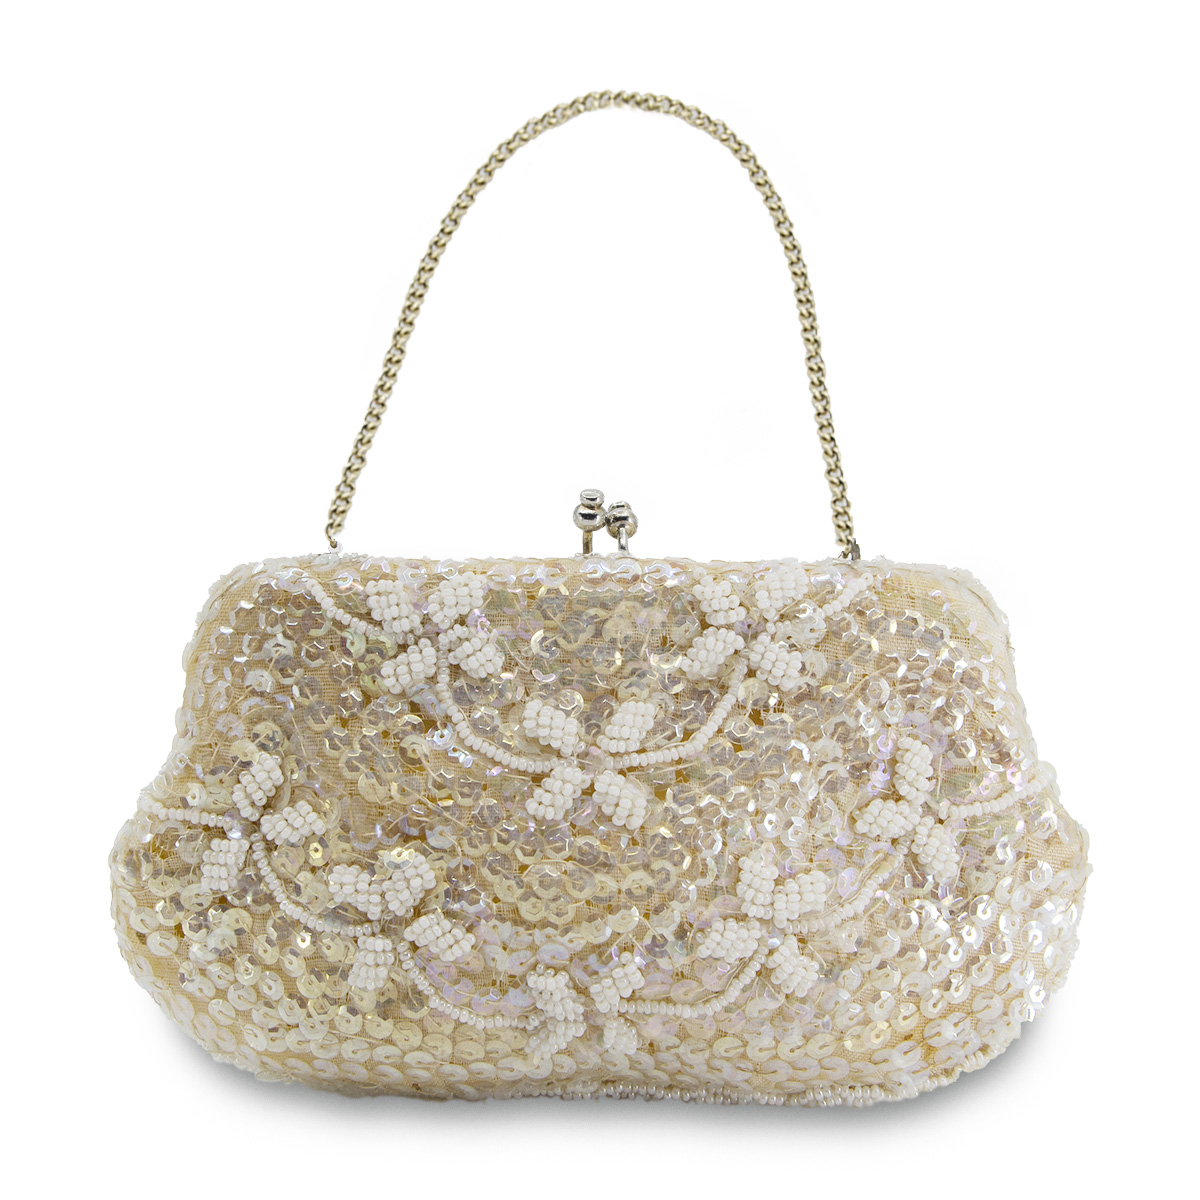 Lot - 1950 FRENCH BEADED & TAMBOUR EMBROIDERED PURSE